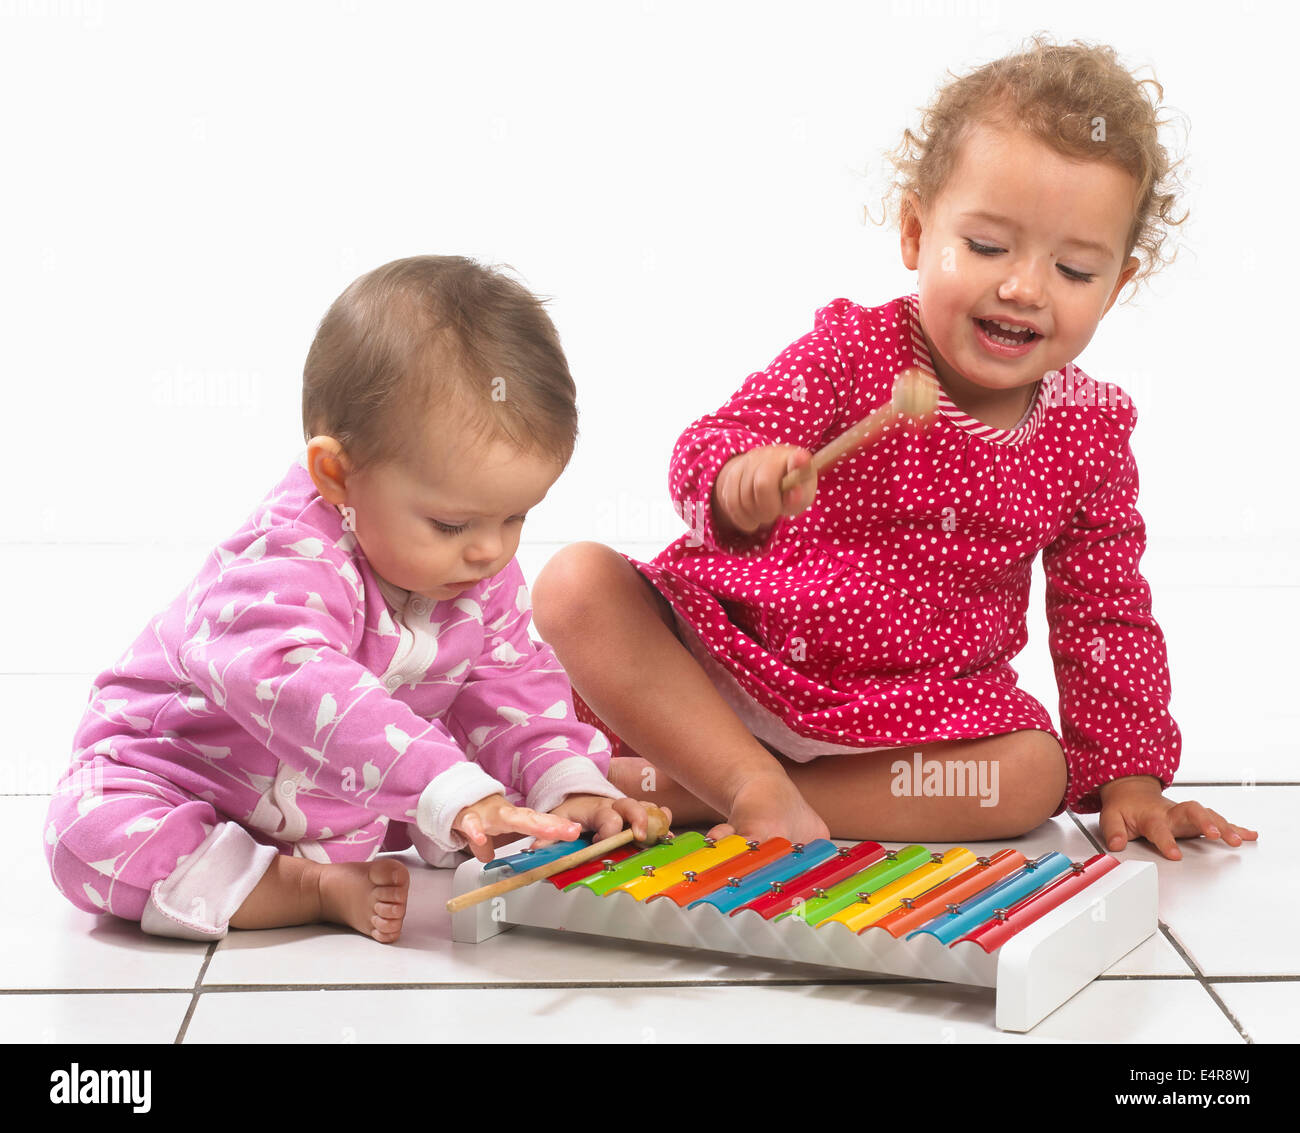 Baby girl (8 months) and young girl (2 years) playing with colourful toy xylophone Stock Photo